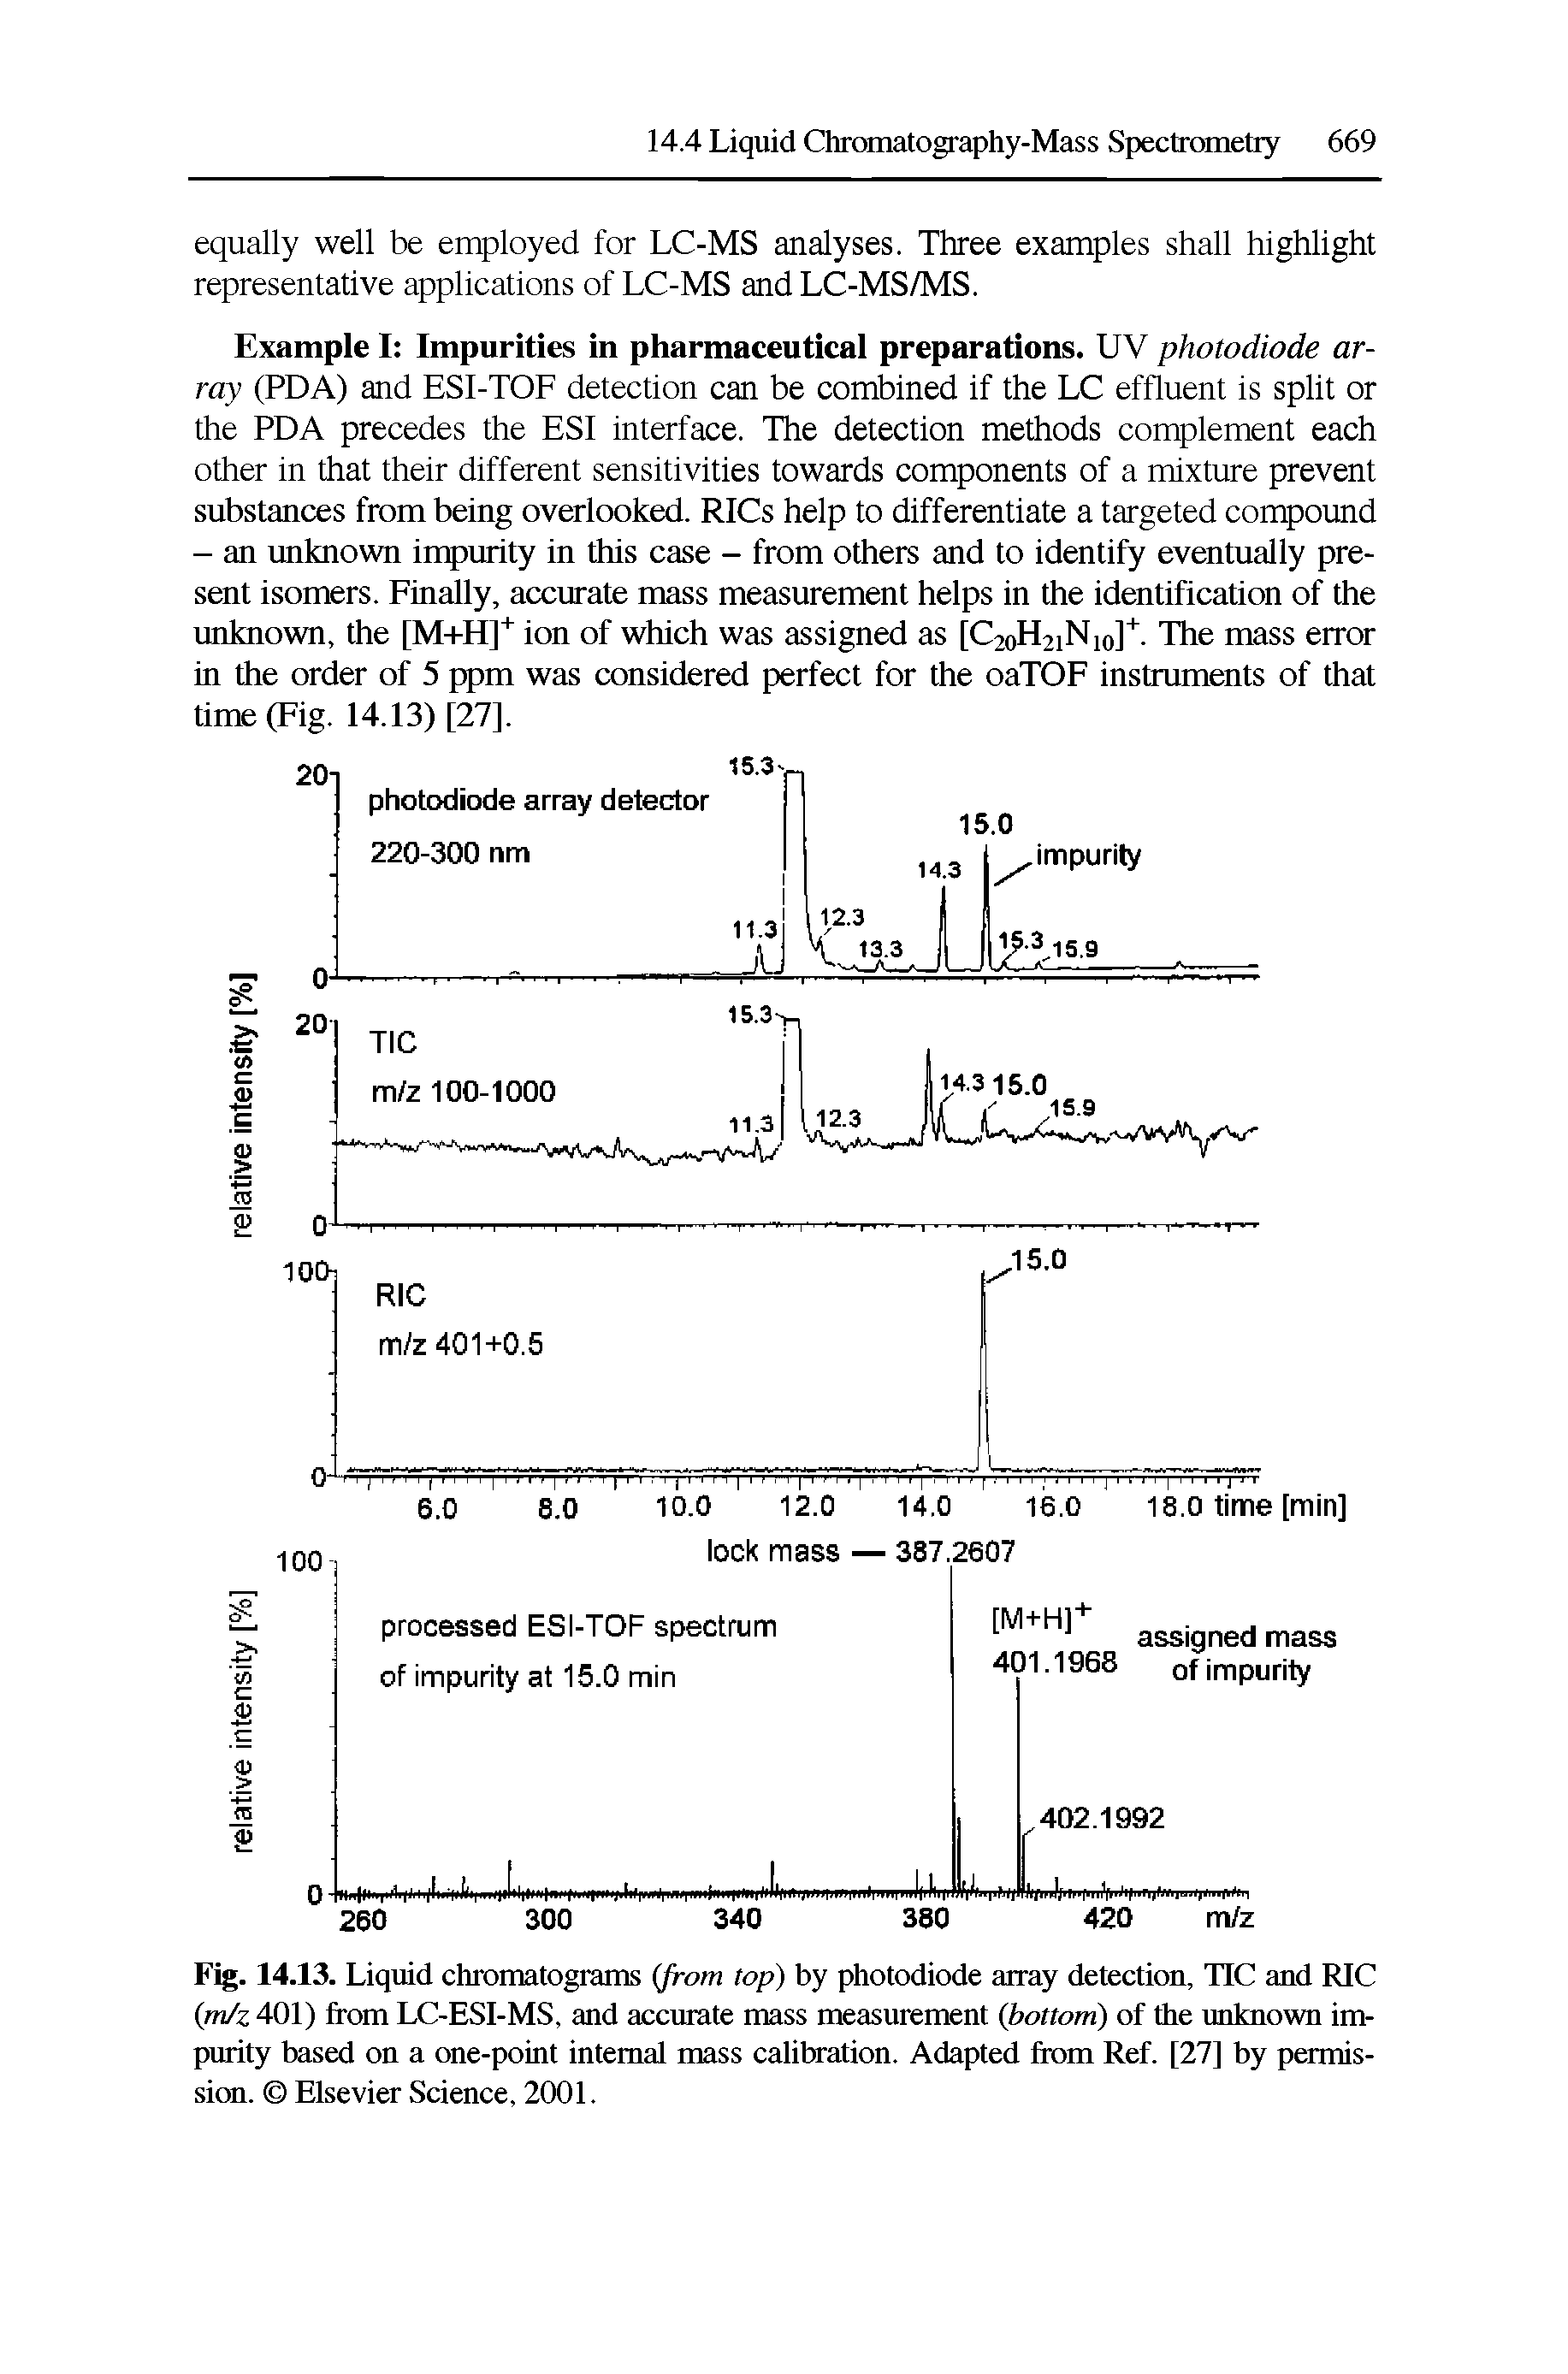 Fig. 14.13. Liquid chromatograms (from top) by photodiode array detection, HC and RIC (m/z 401) from LC-ESI-MS, and accurate mass measurement (bottom) of the unknown impurity based on a one-point internal mass calibration. Adapted from Ref. [27] by permission. Elsevier Science, 2001.